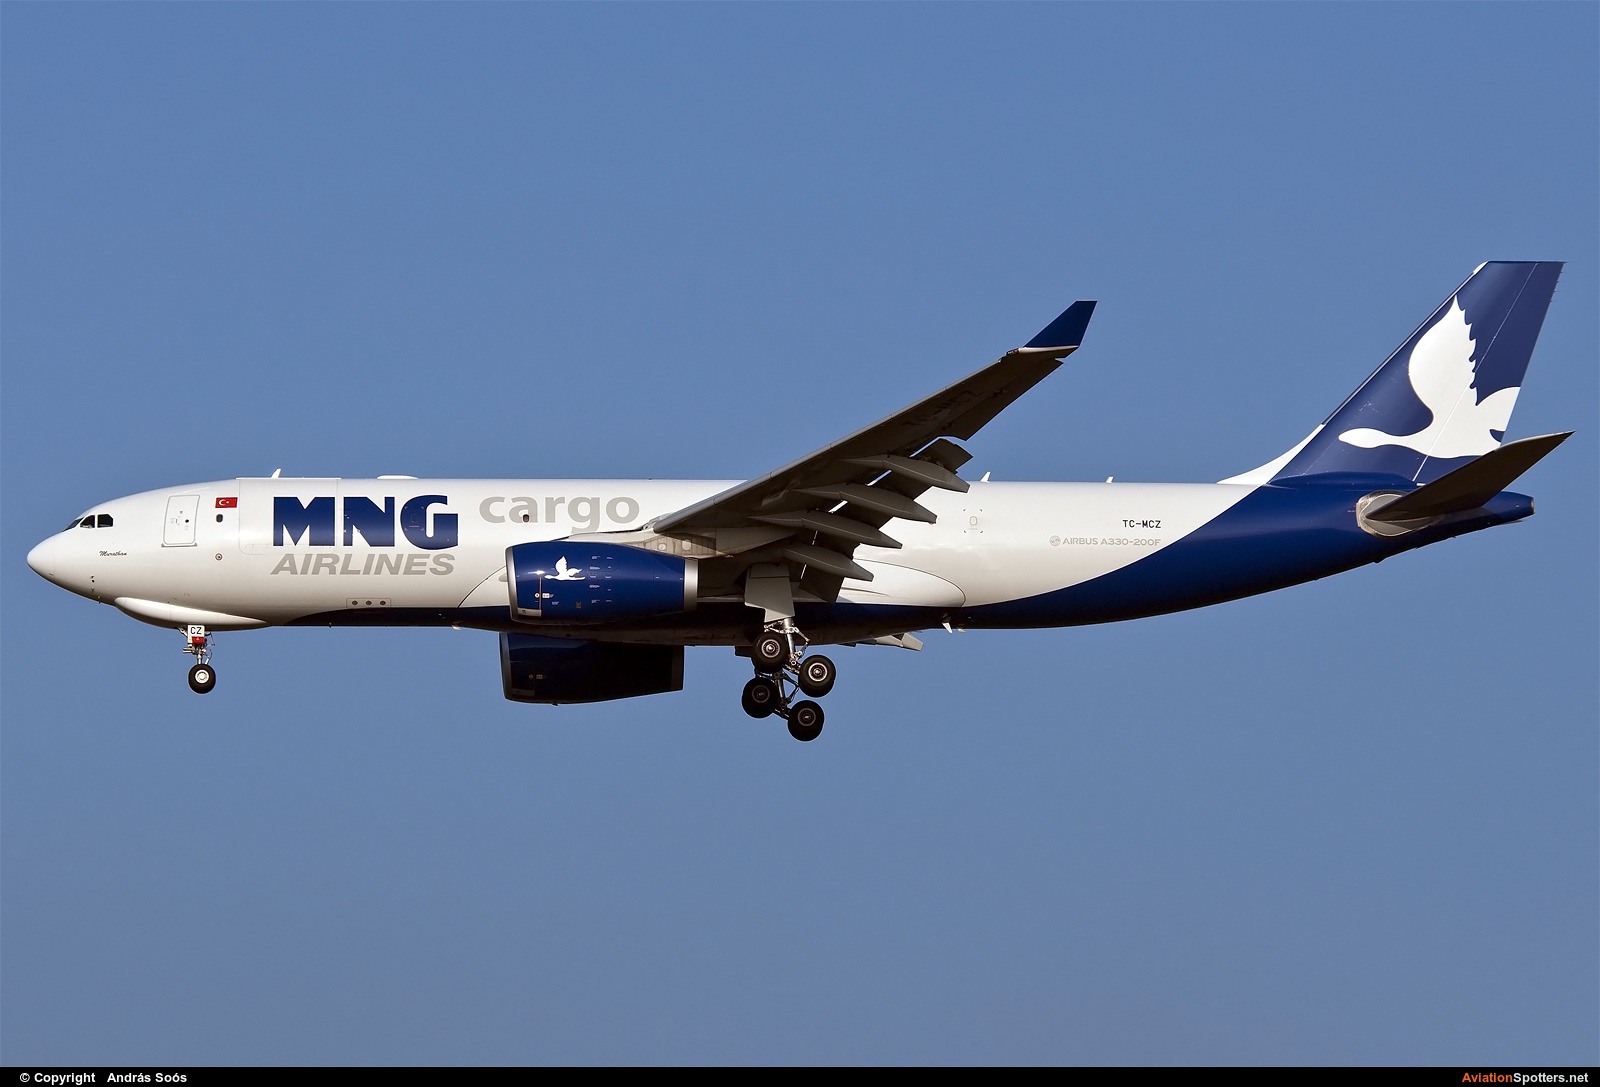 MNG Cargo  -  A330-200F  (TC-MCZ) By András Soós (sas1965)